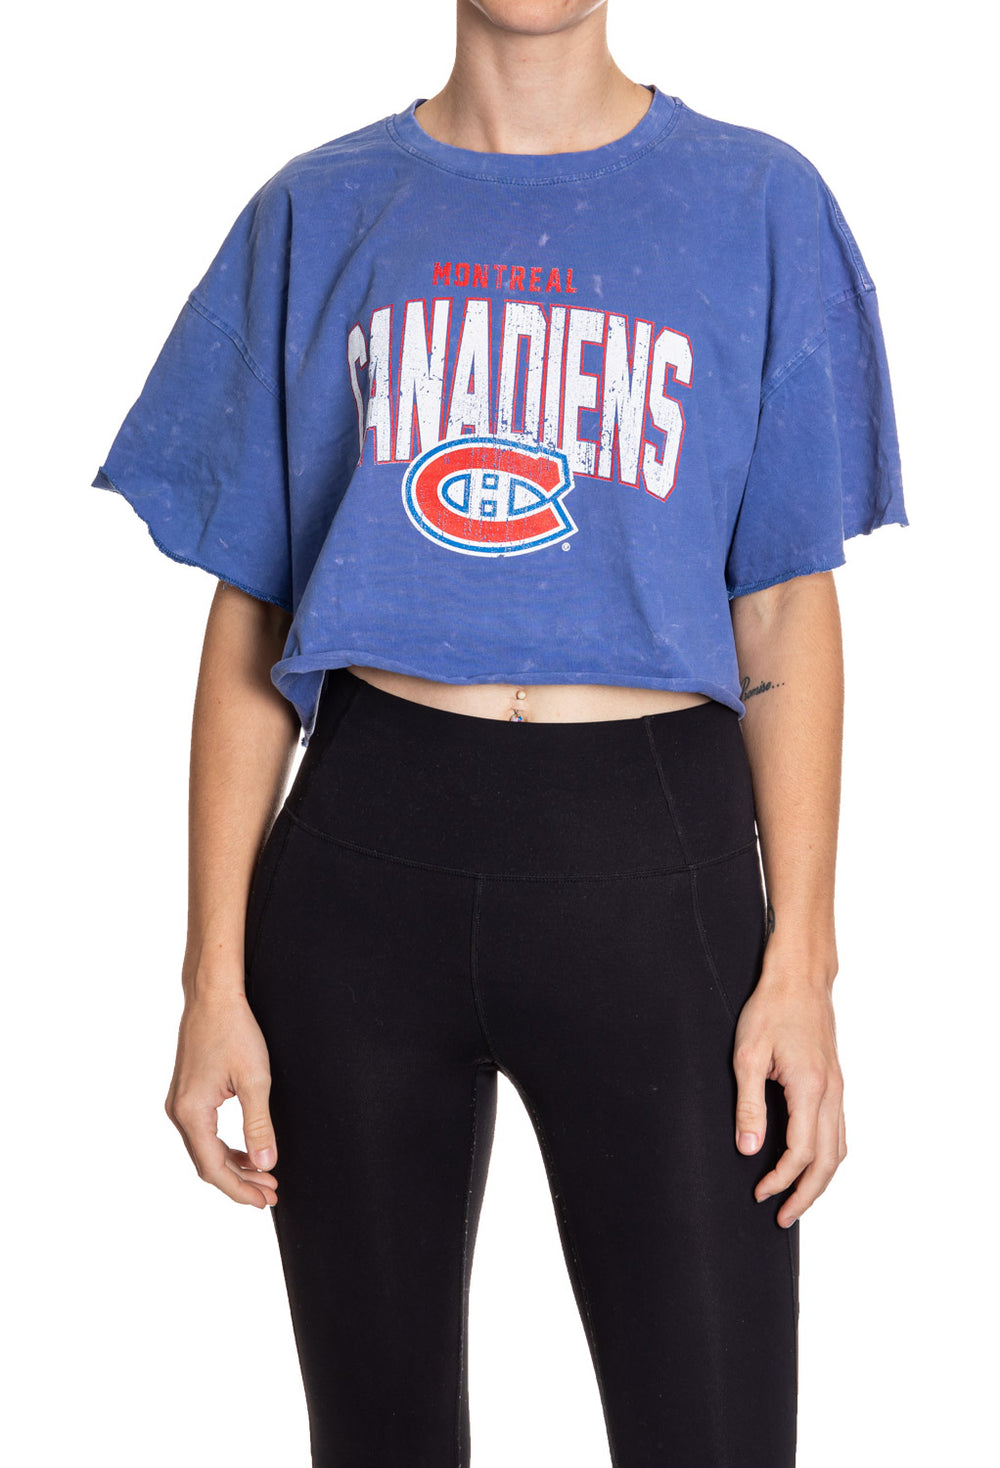 Woman standing in front of a white background wearing an oversized, blue, acid wash crop top - featuring a Montreal Canadians logo in the center of the shirt.